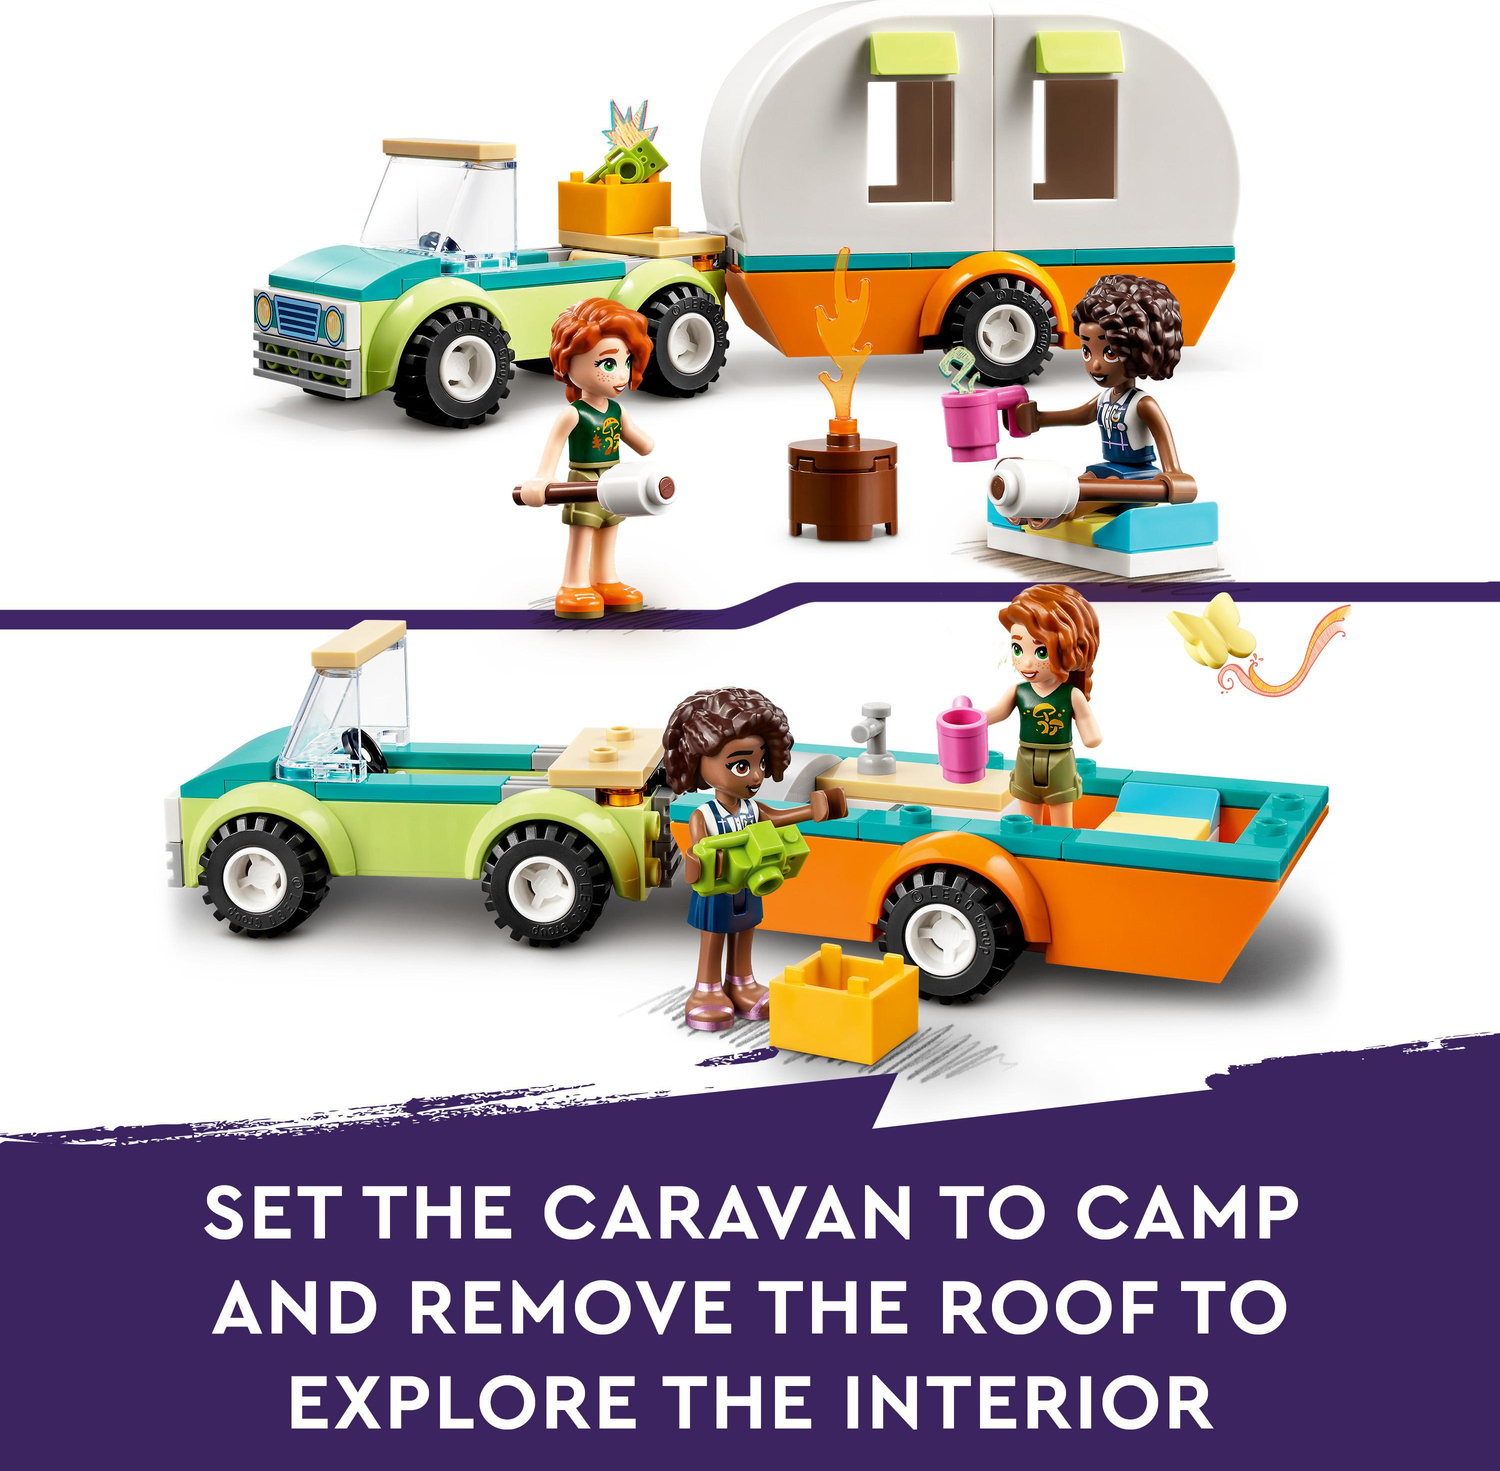 LEGO® Friends: Holiday Camping Trip